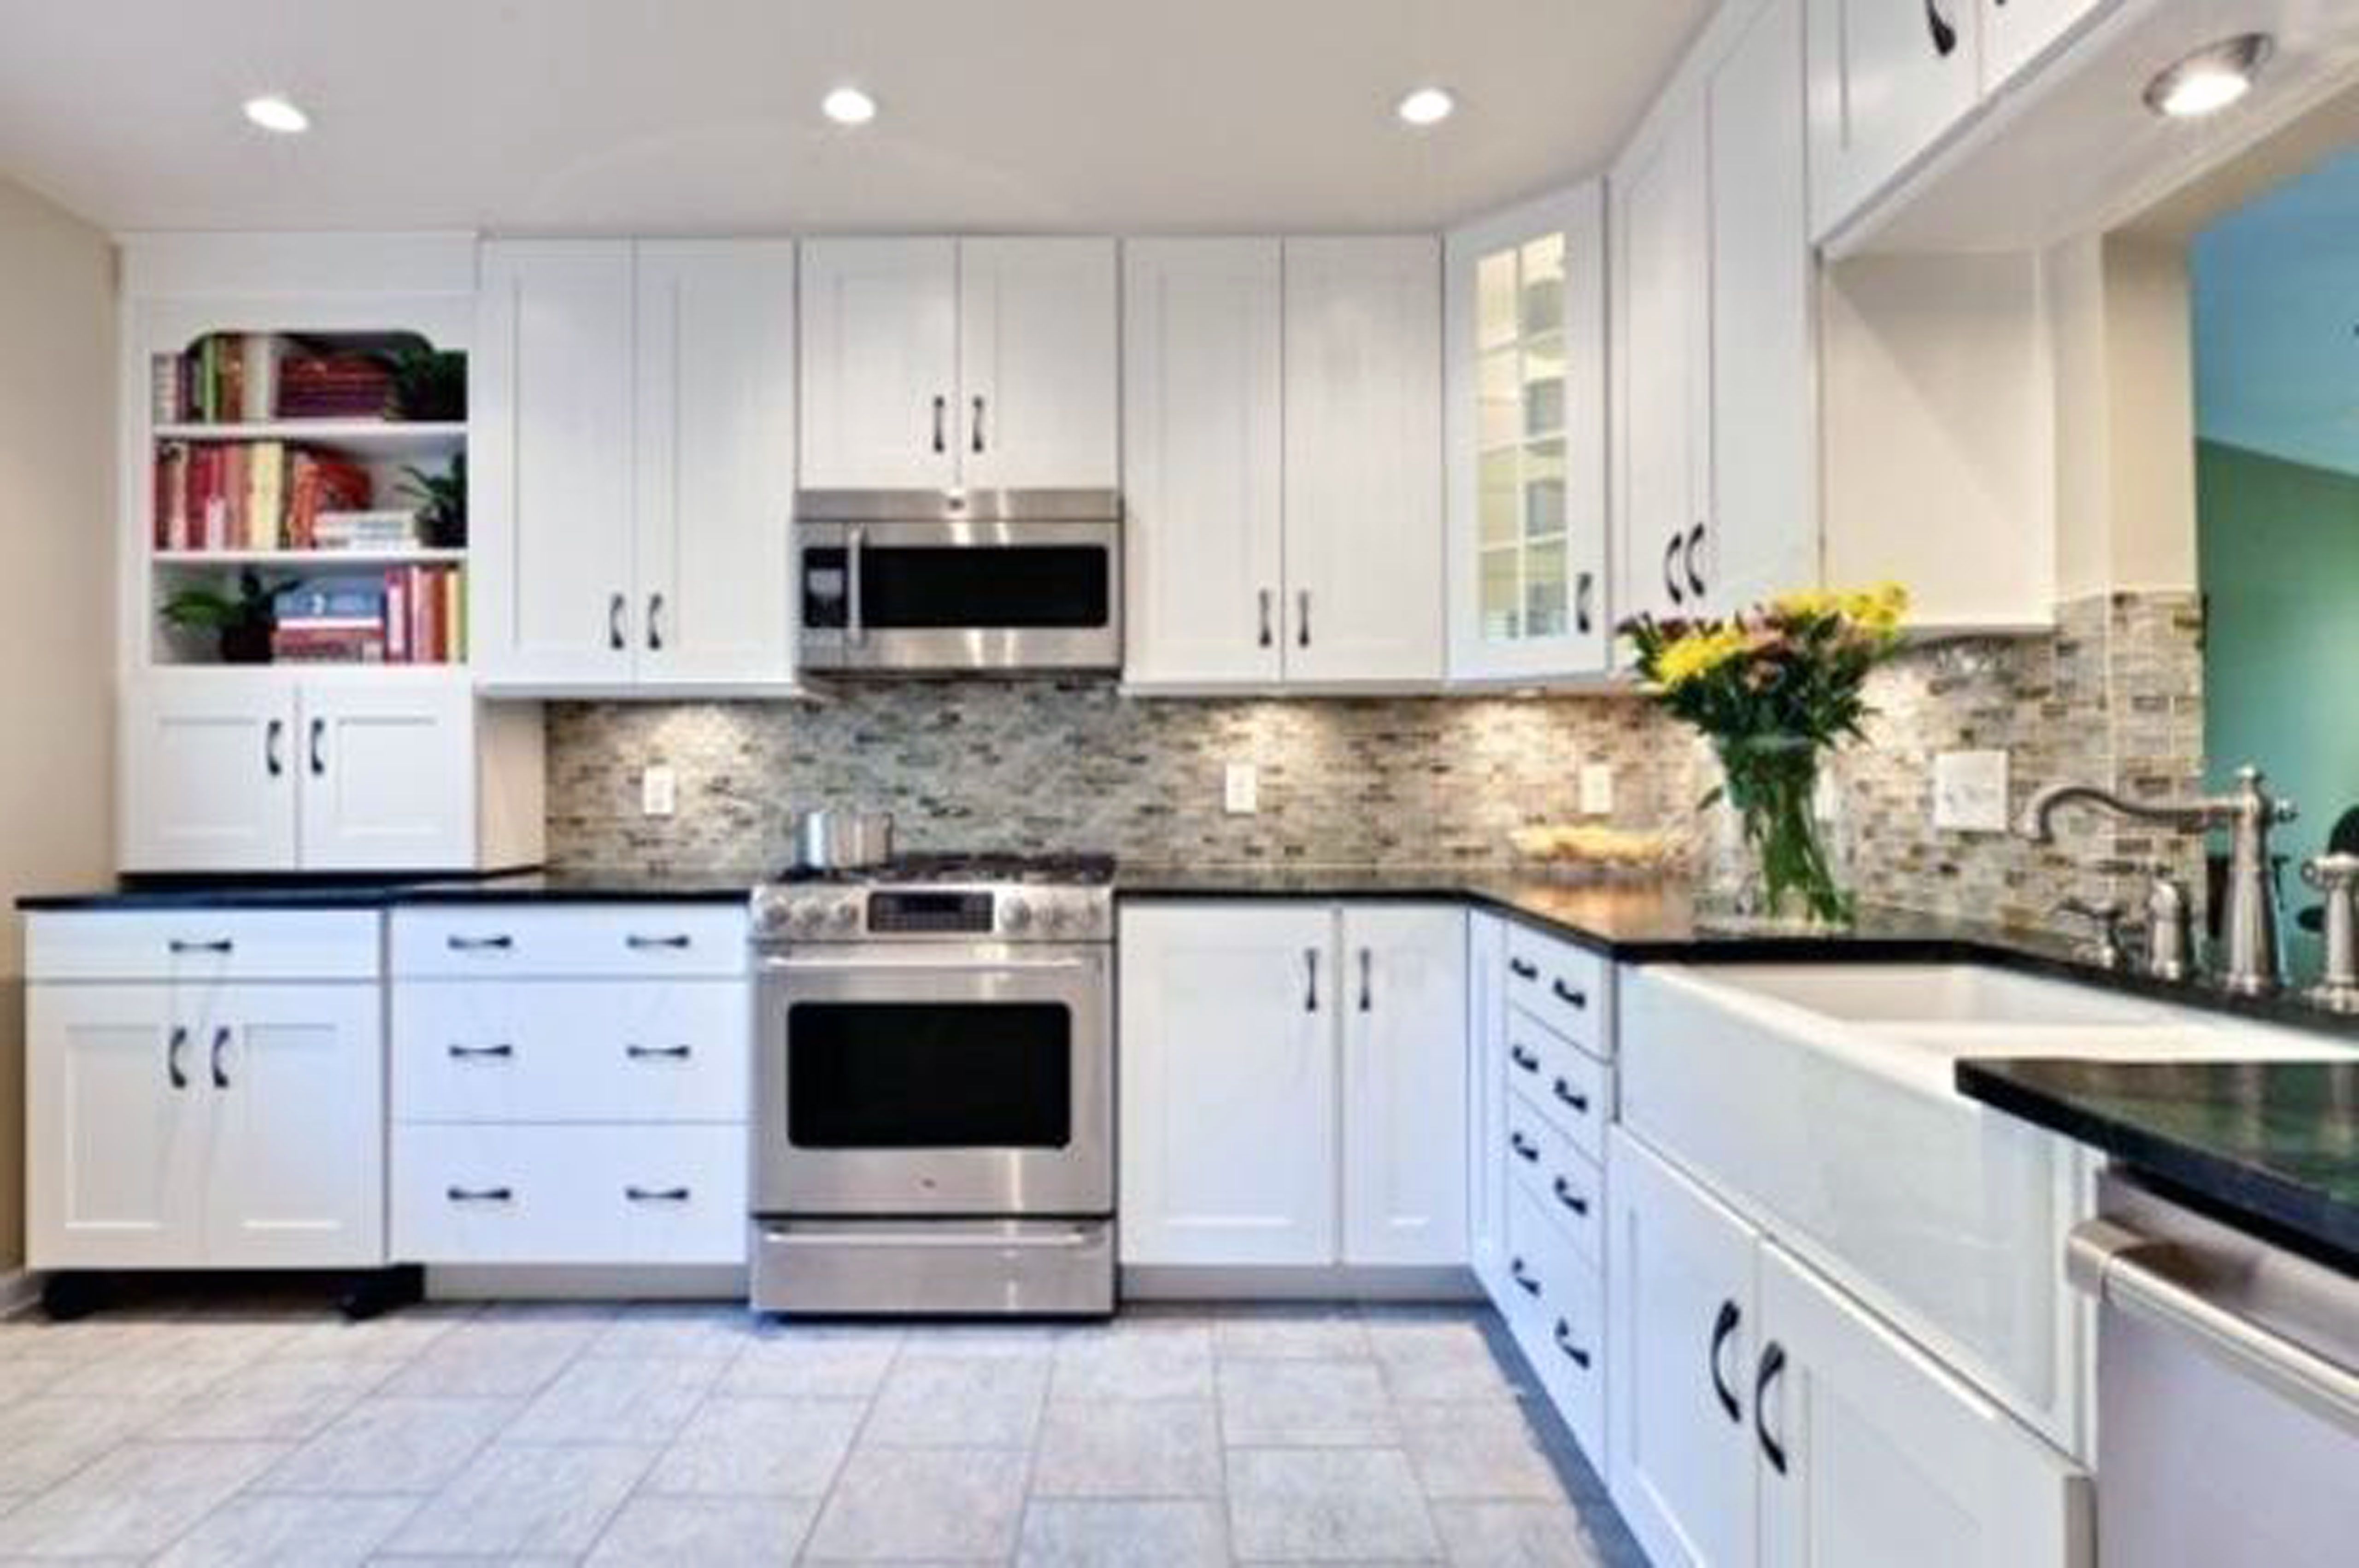 kitchen with white cabinets and black countertops ... bookcase a perfect backsplash ideas for white cabinets and XRGCIUU